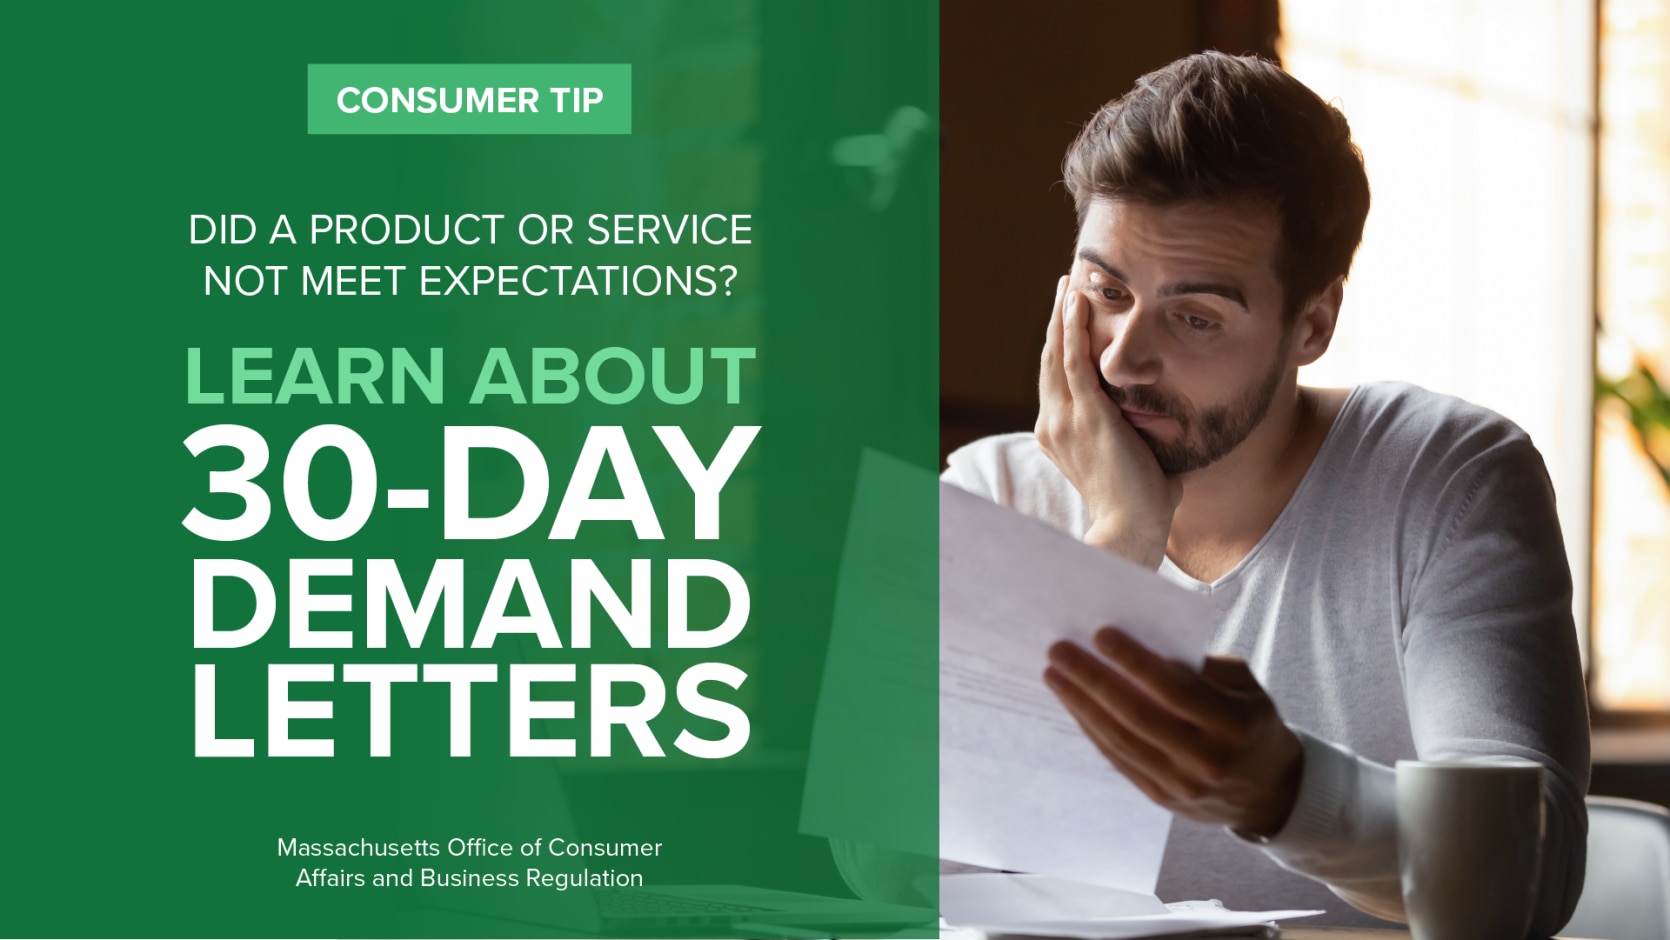 What You Need to Know About 30-Day Demand Letters